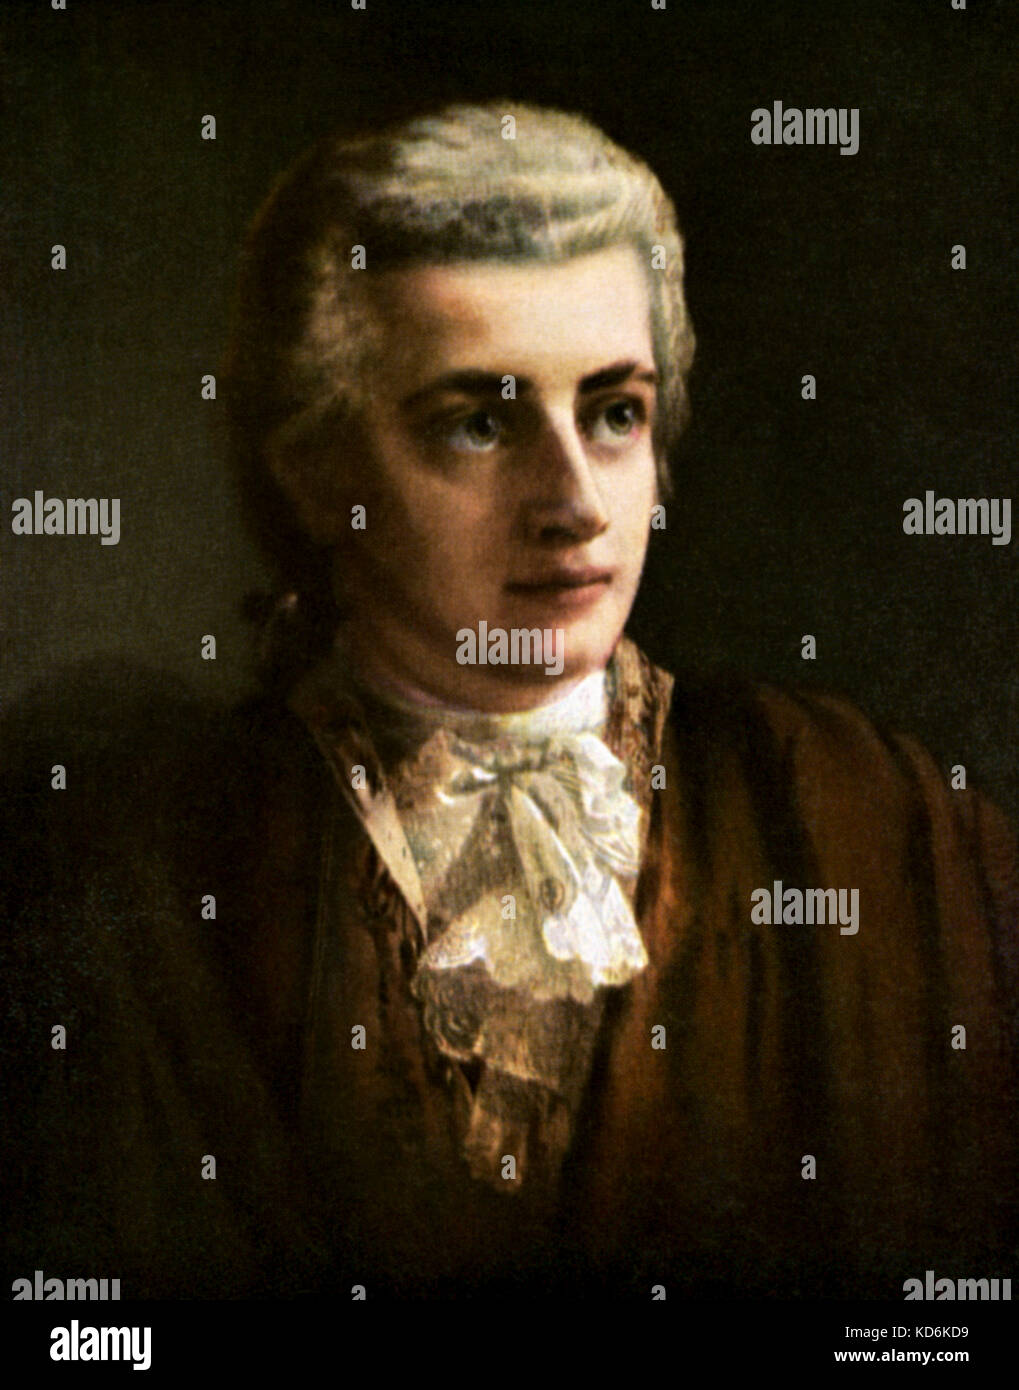 Wolfgang Amadeus Mozart - portrait of Austrian composer as a young man, by Vogel. 1756-1791 Stock Photo